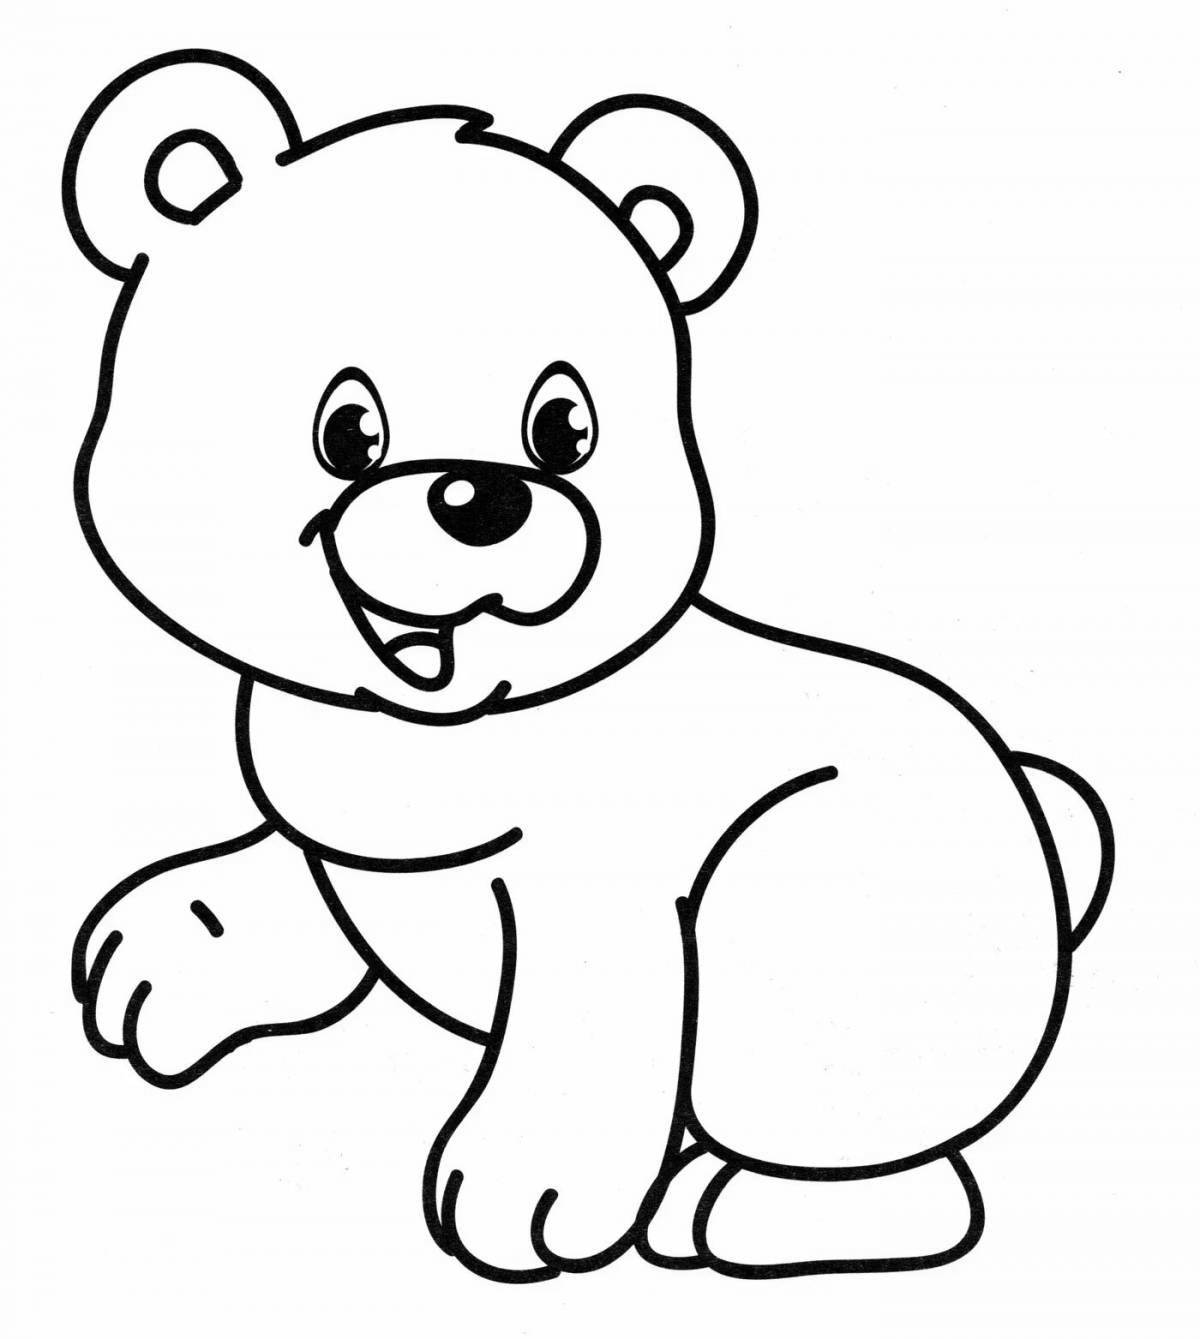 Coloring teddy bear for children 5-6 years old